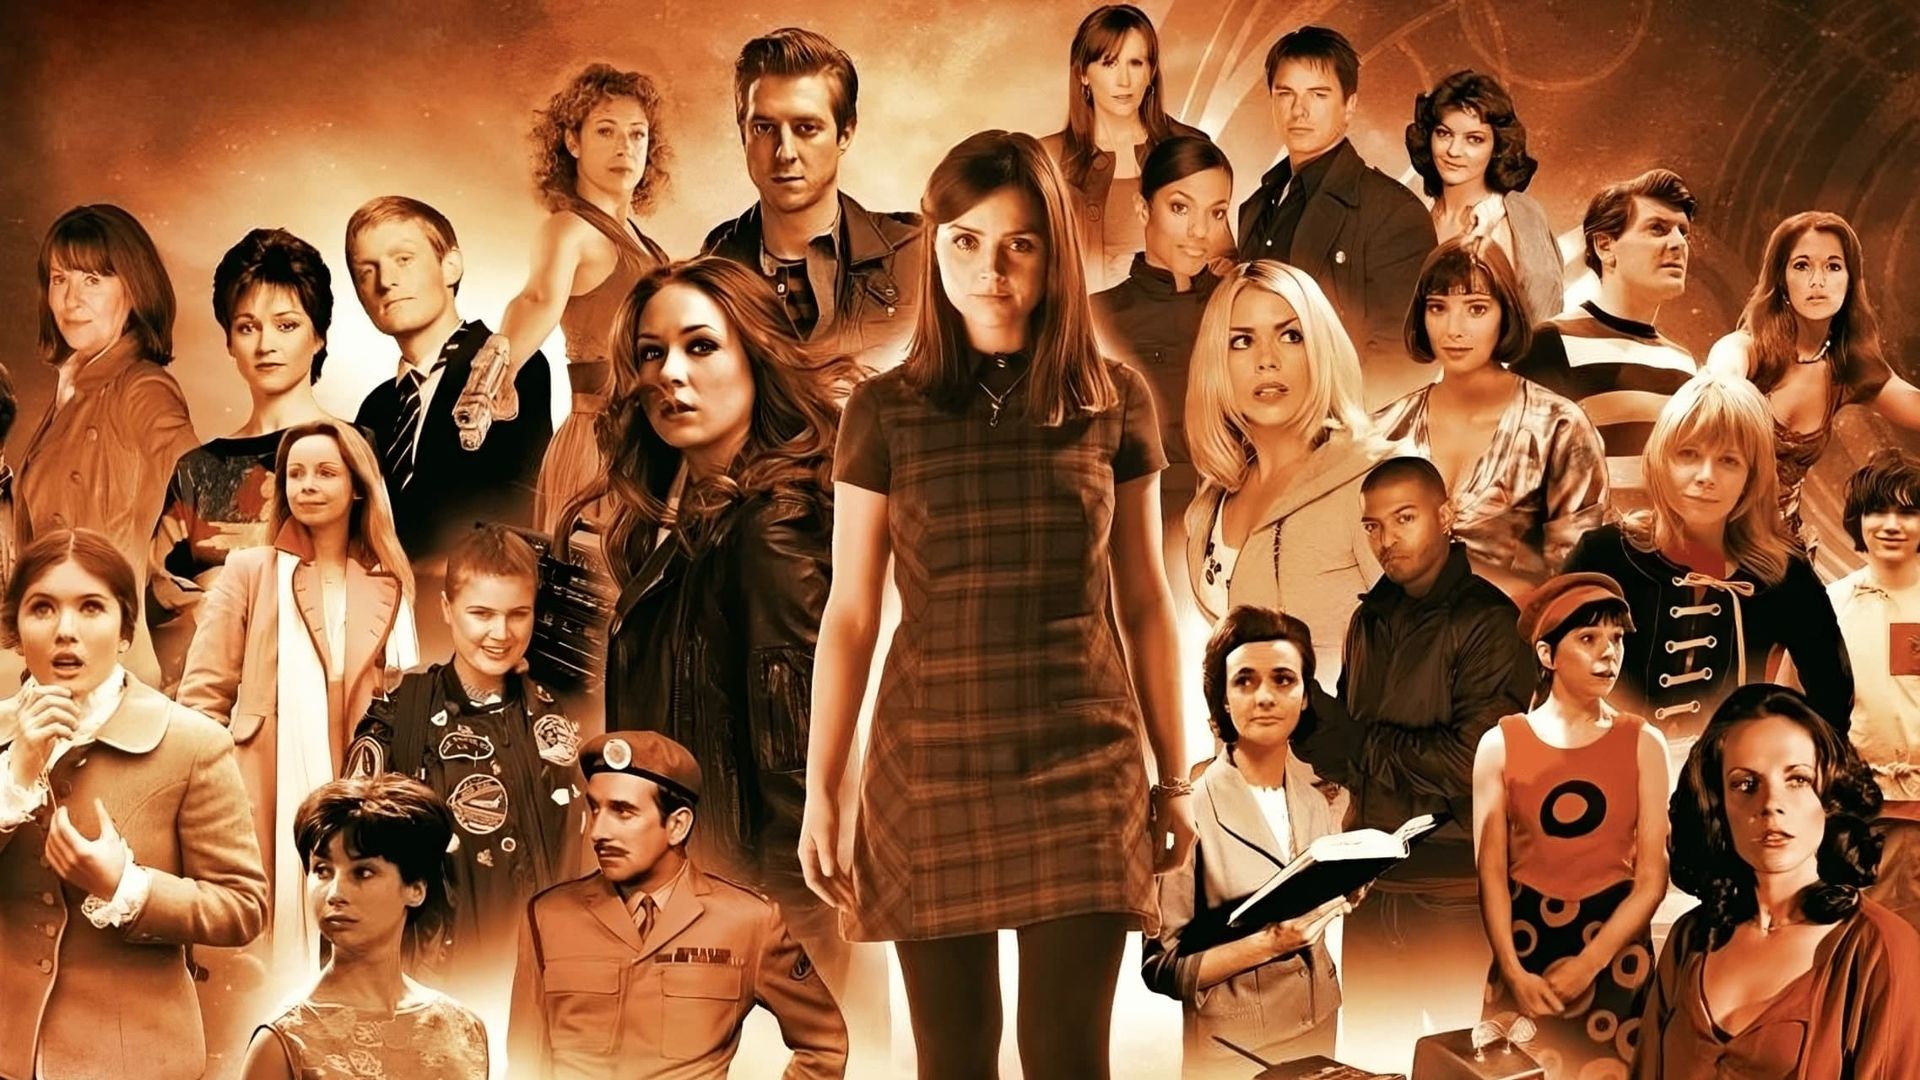 Doctor Who: The Ultimate Companion background